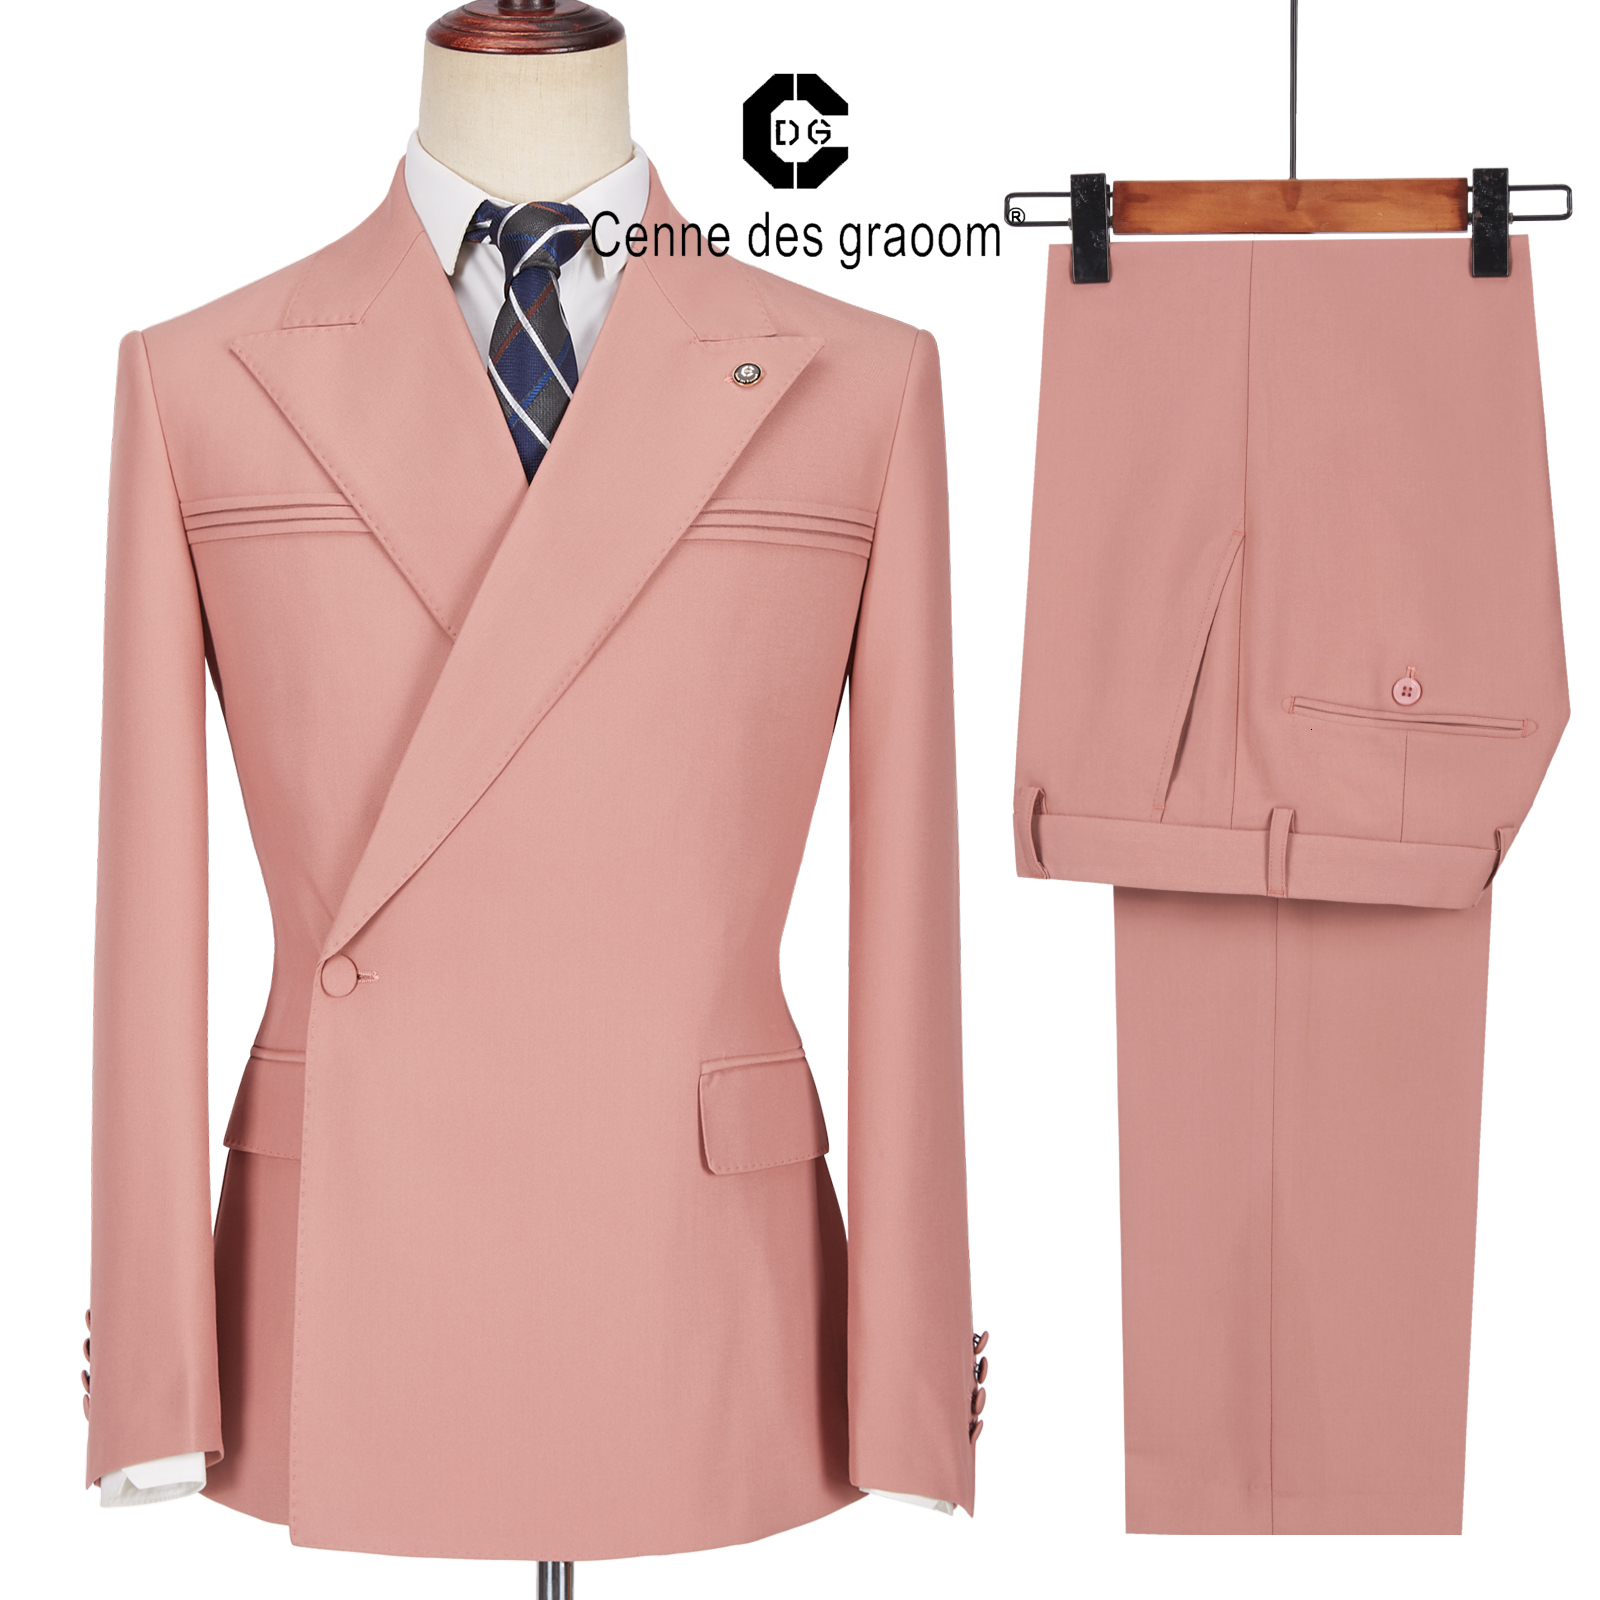 

Men's Suits Blazers Cenne Des Graoom Men's Suits One Button Double Breasted Pink Tailor-Made Blazer Pants Business Causal Party Singer Groom Wedding 230313